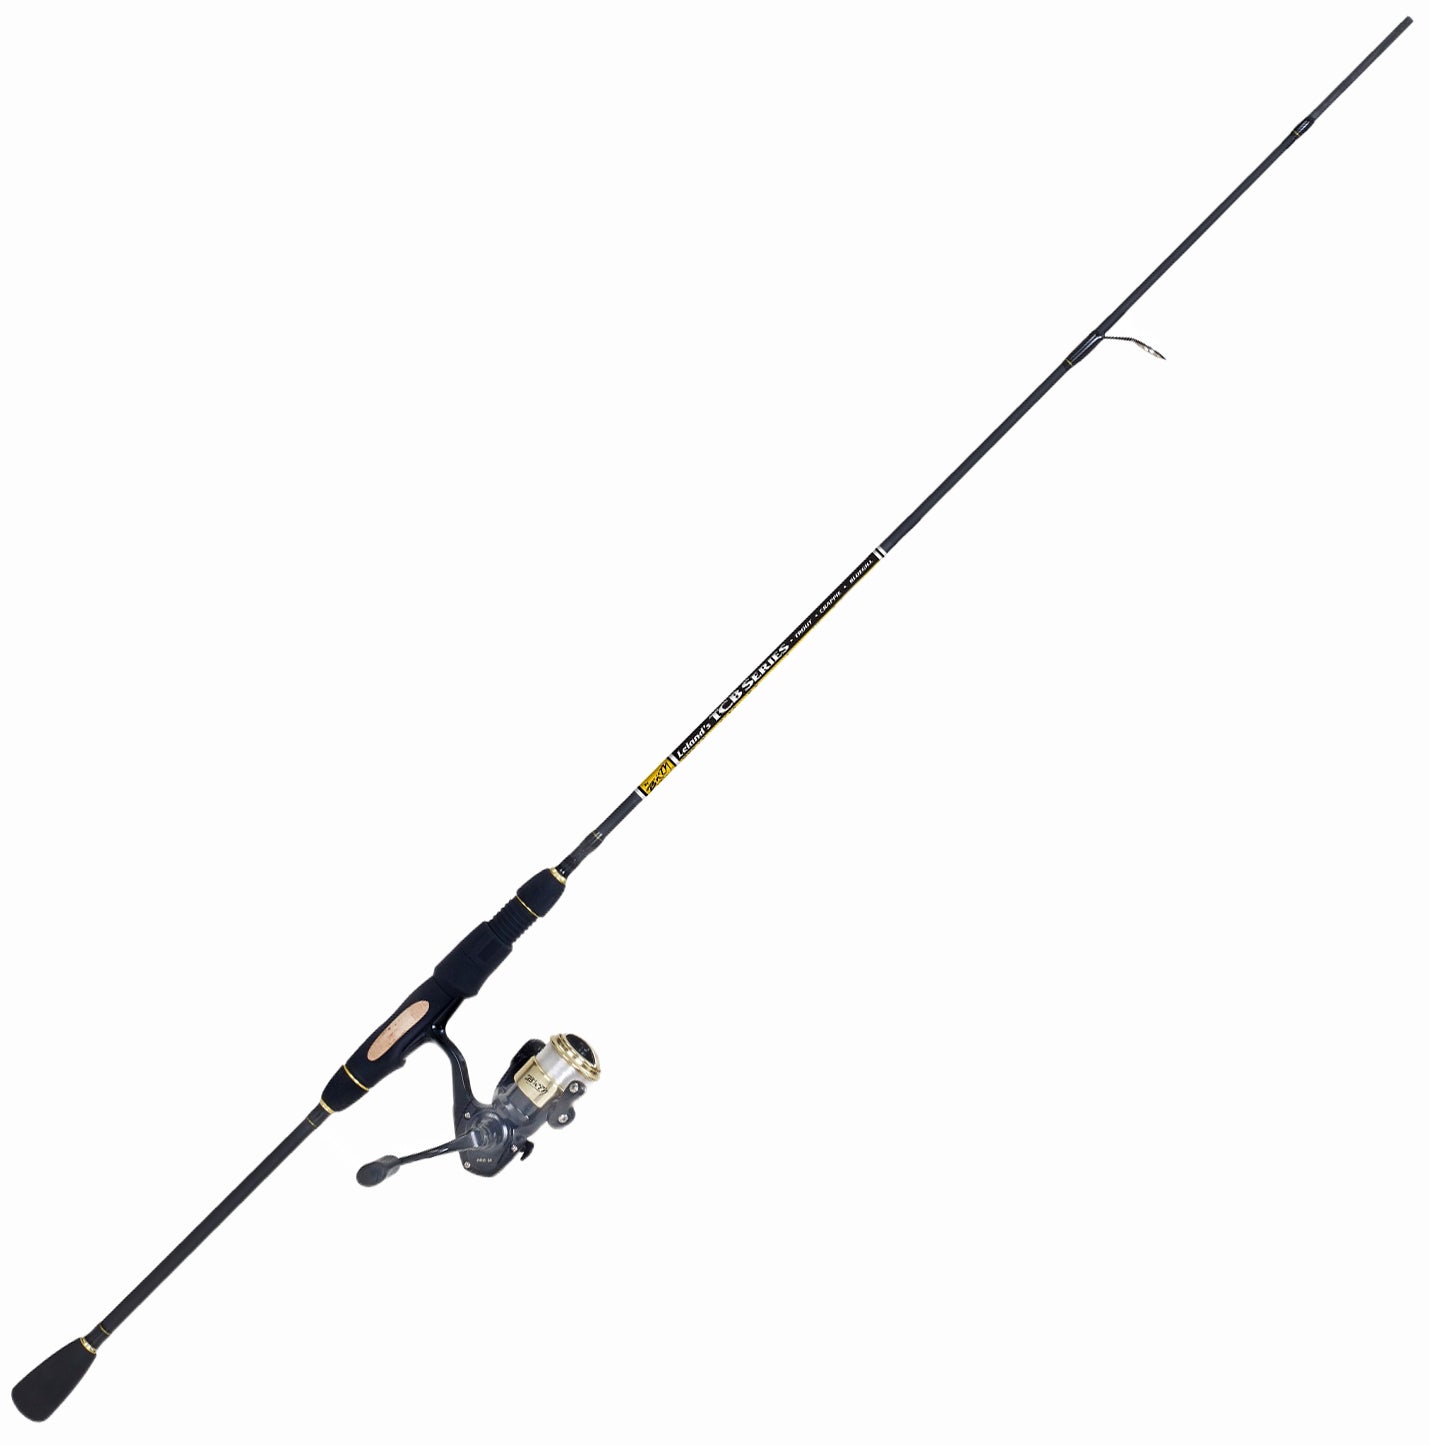 Eagle Claw Crappie Fishing Rods & Poles for sale